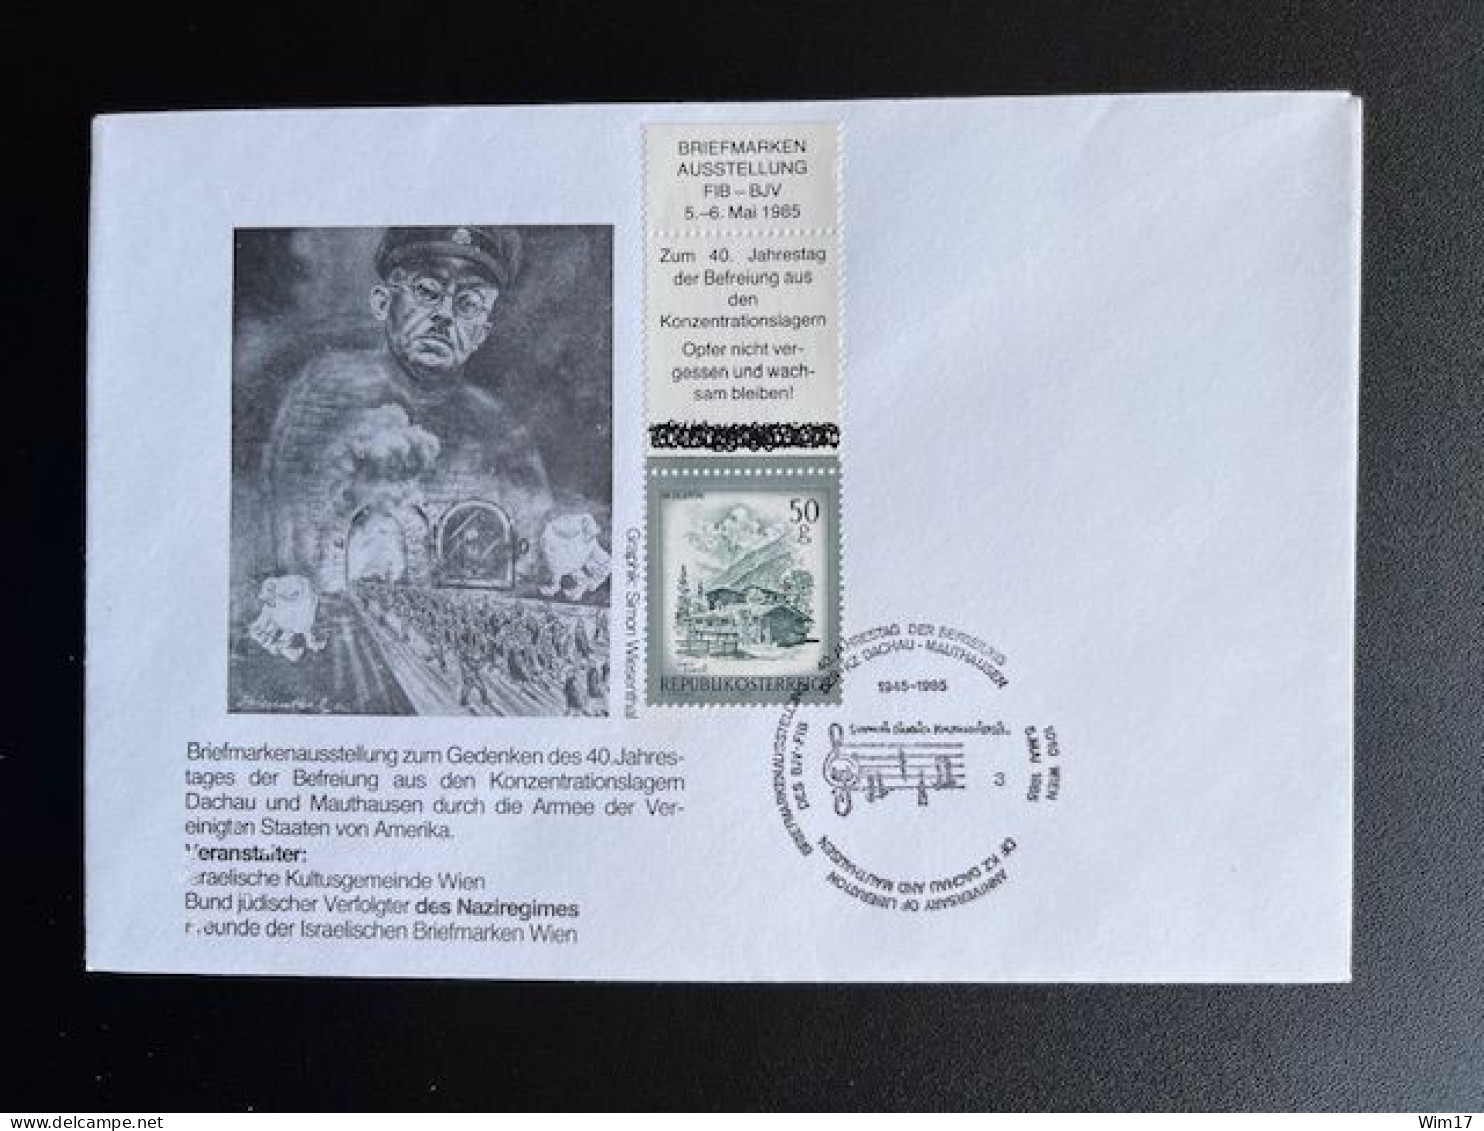 AUSTRIA 1985 SPECIAL COVER 40 YEARS LIBERATION OF DACHAU AND MAUTHAUSEN 05-05-1985 OOSTENRIJK OSTERREICH JUDAICA - Lettres & Documents